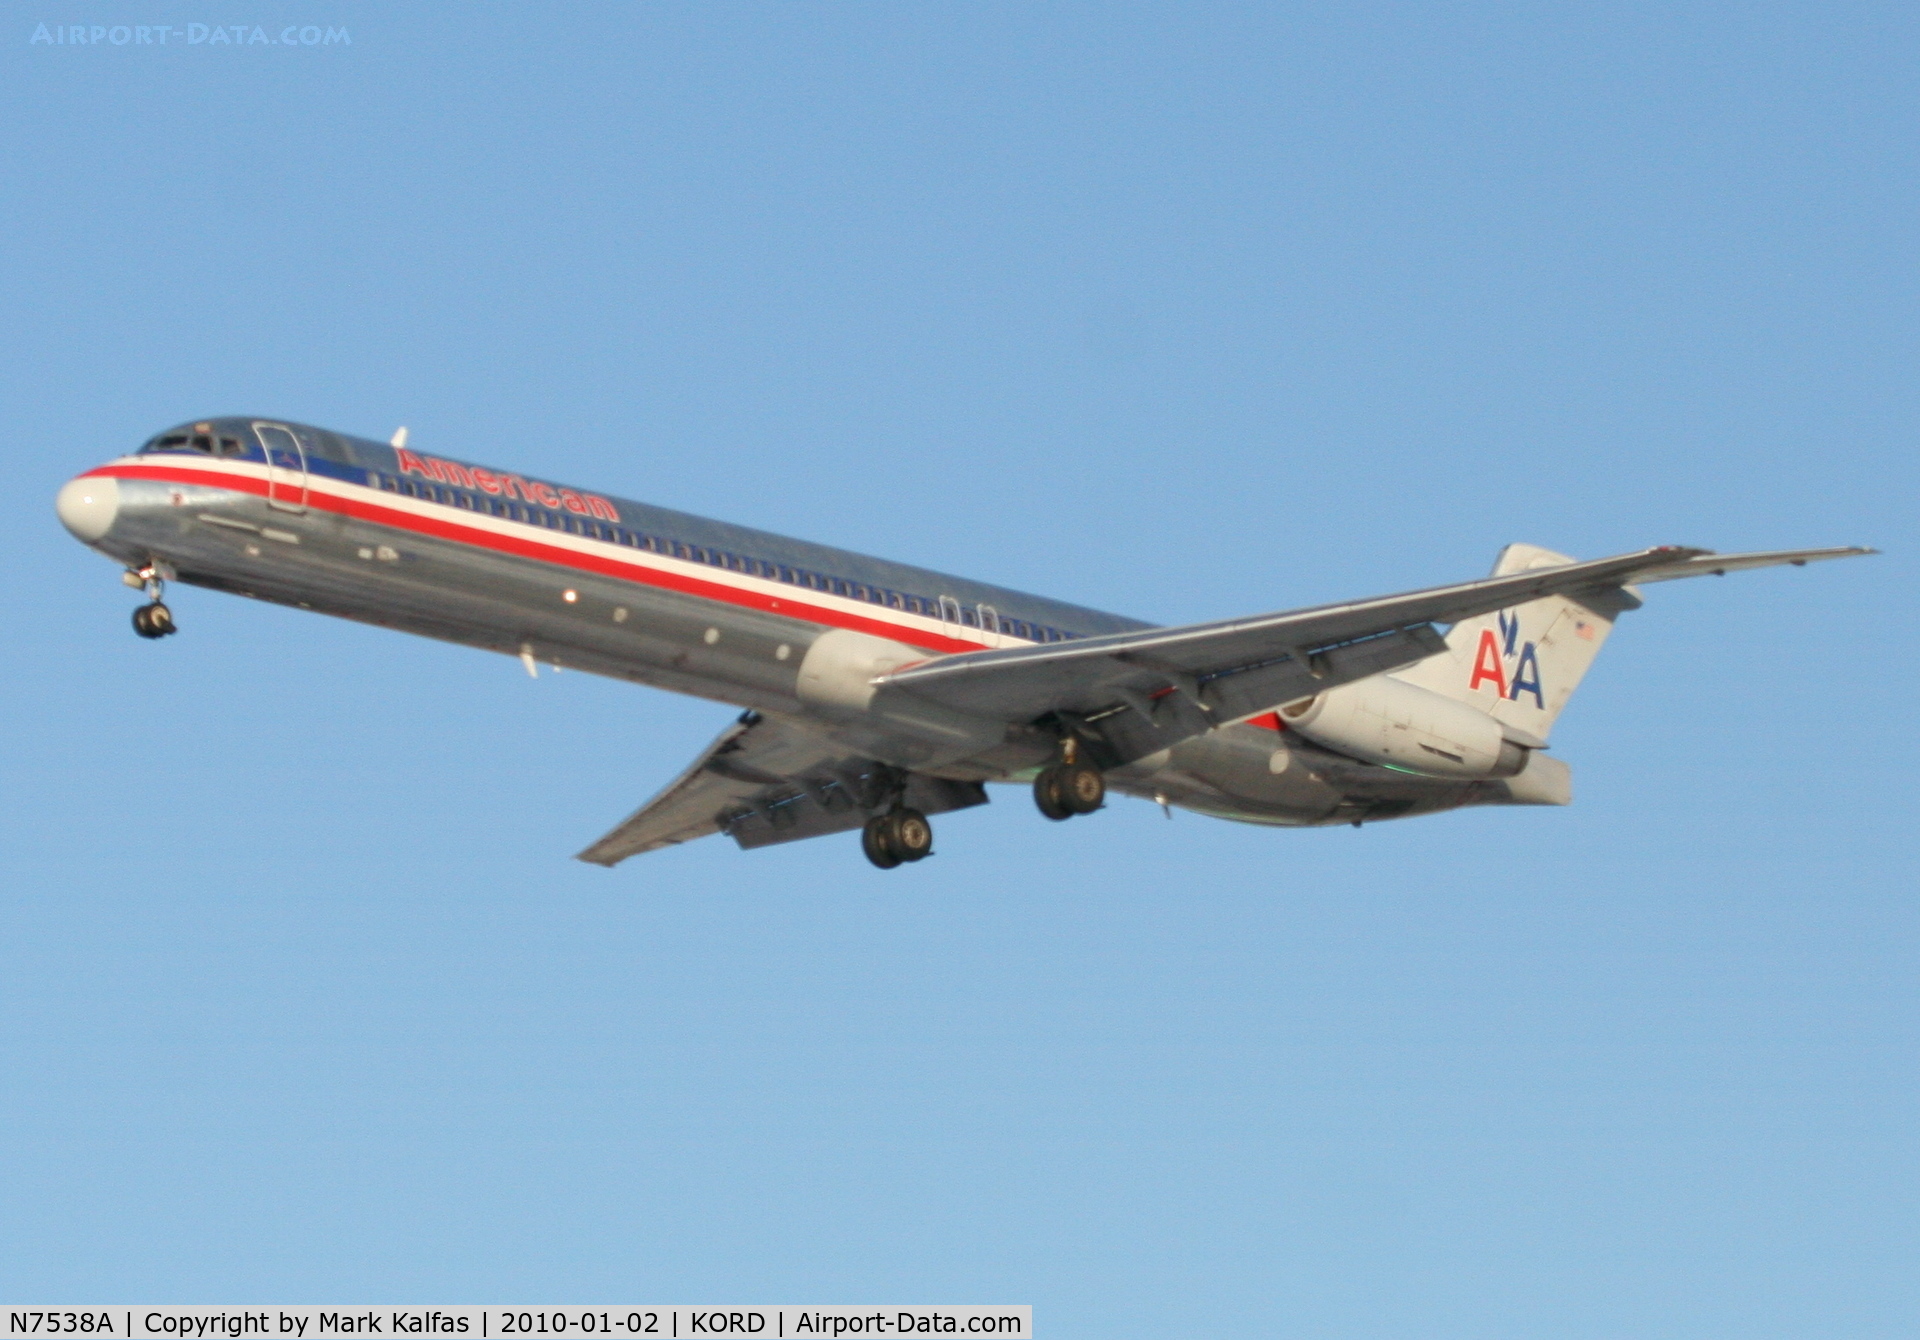 N7538A, 1990 McDonnell Douglas MD-82 (DC-9-82) C/N 49992, American Airlines MD-82, AAL2486, arriving RWY 28 KORD from KAUS.